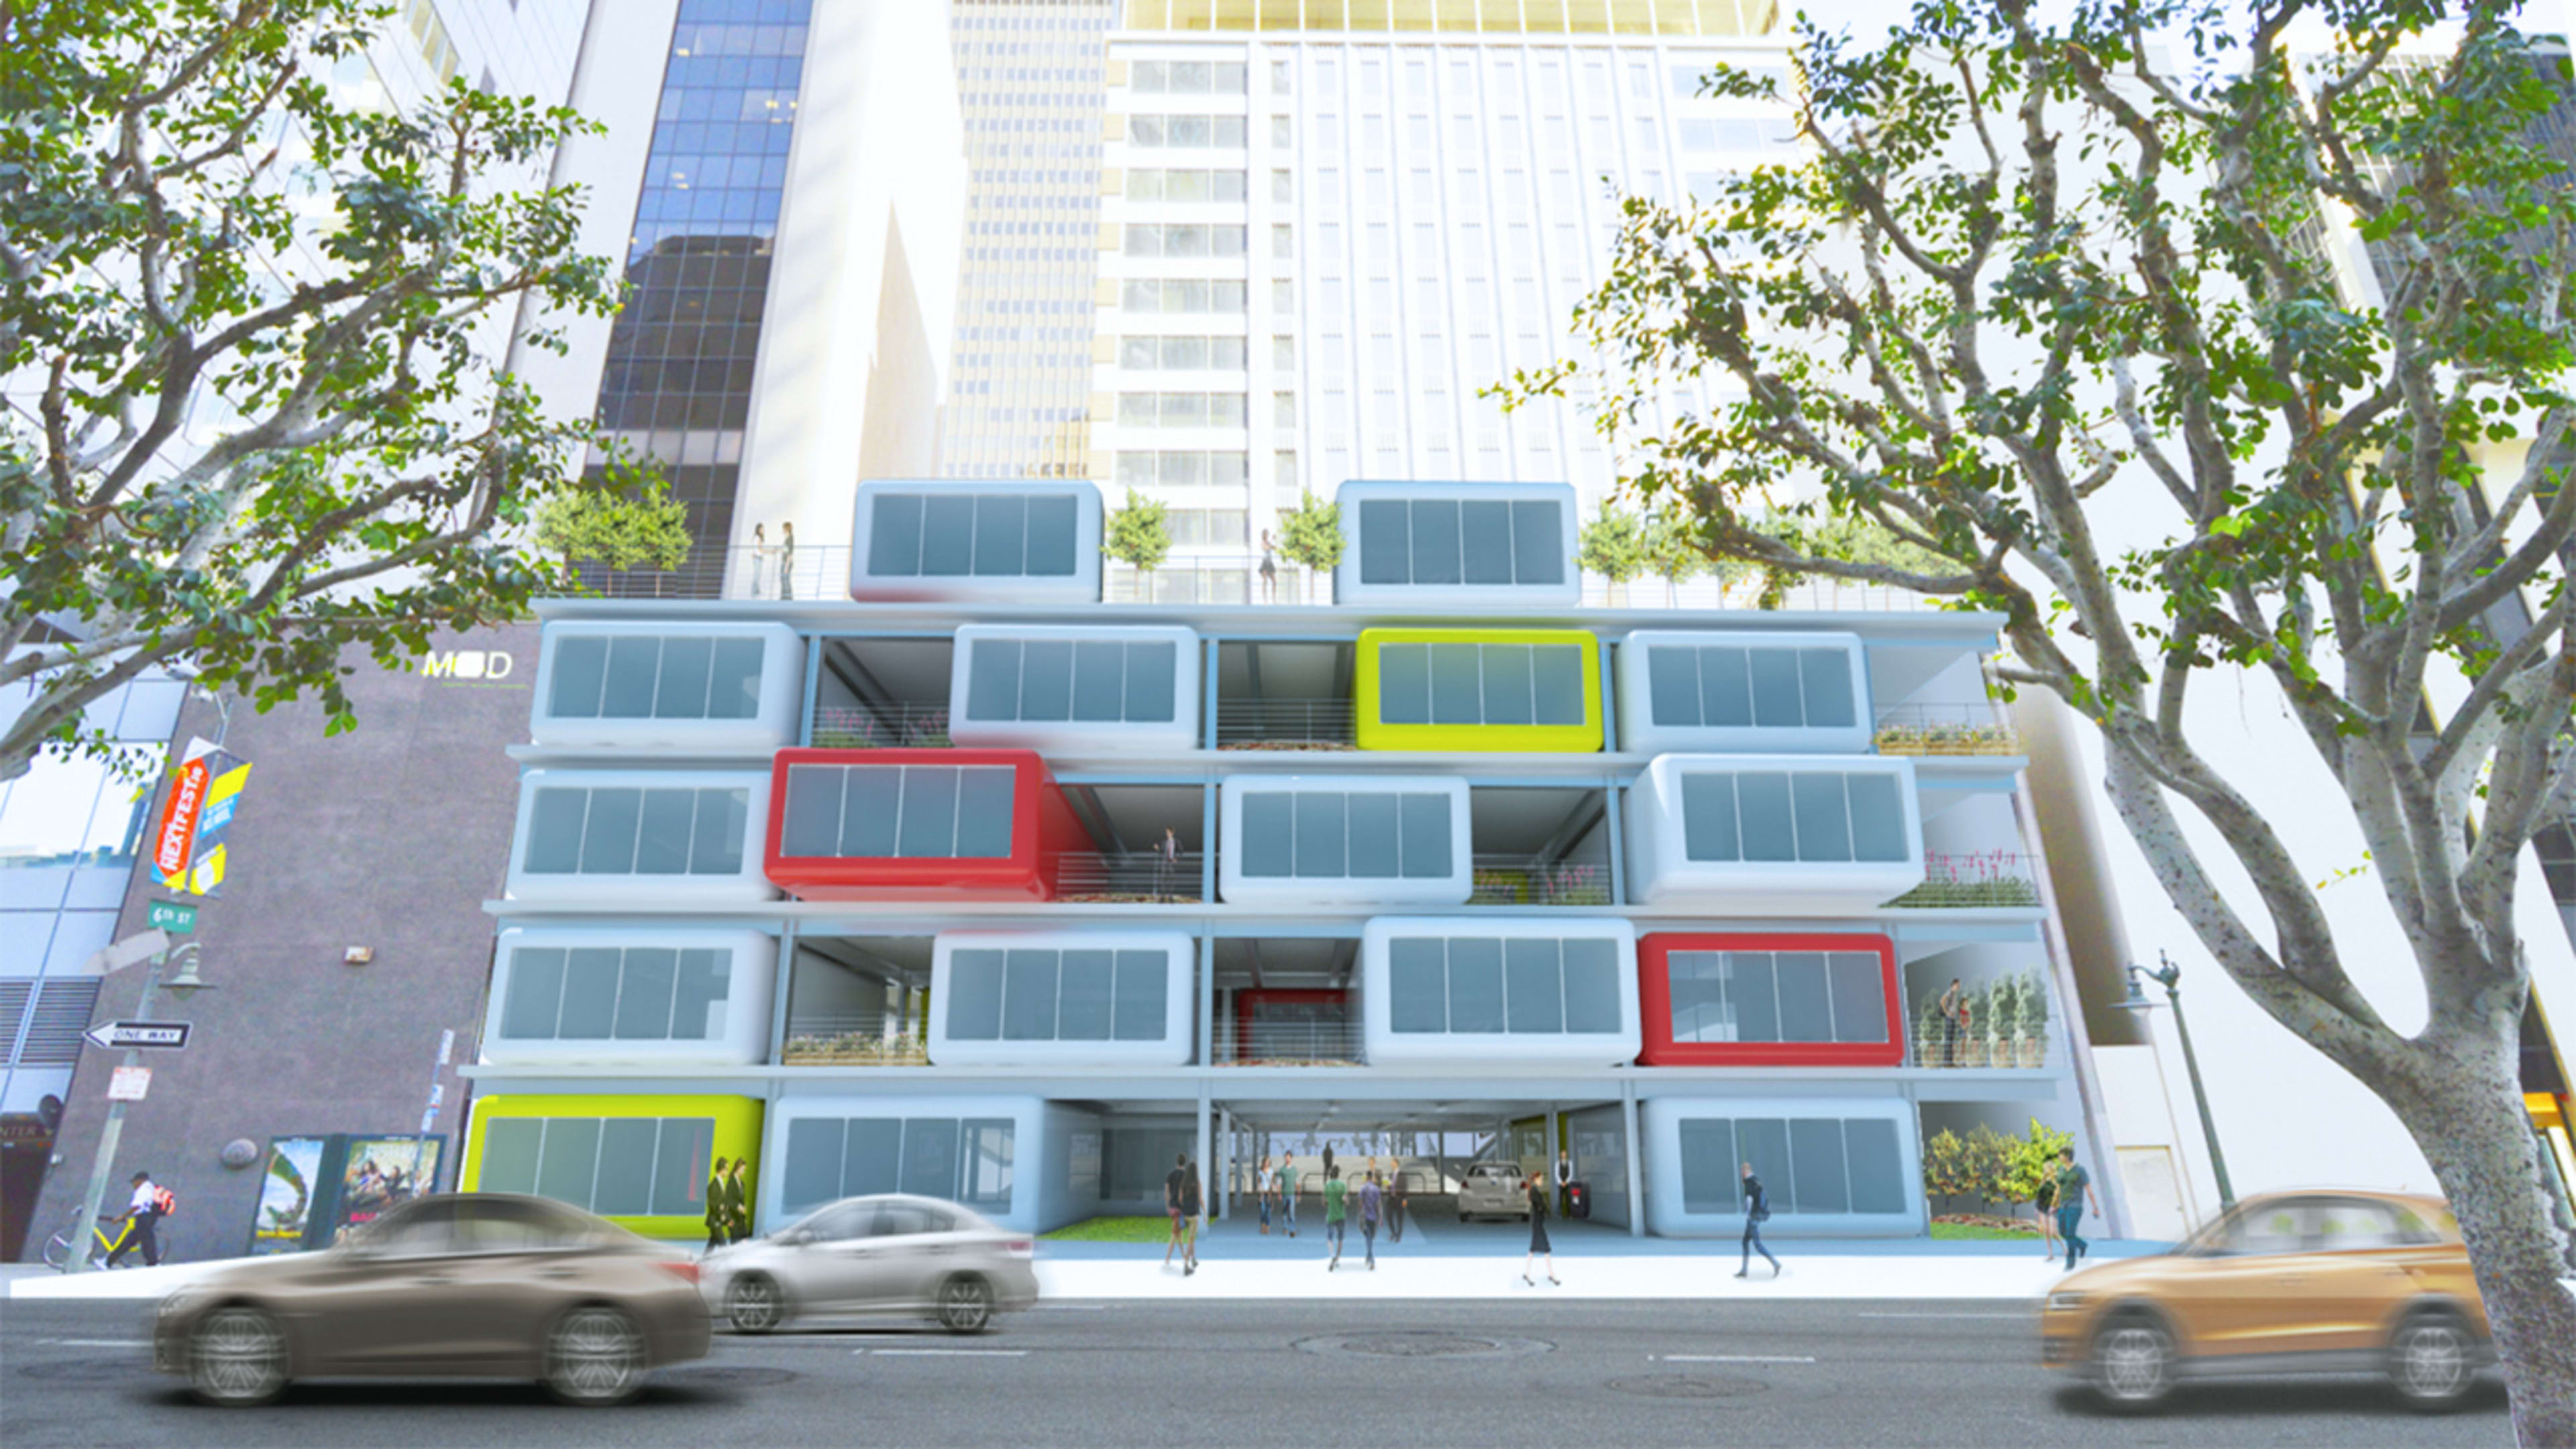 These future-proof parking garages can easily morph into offices or housing